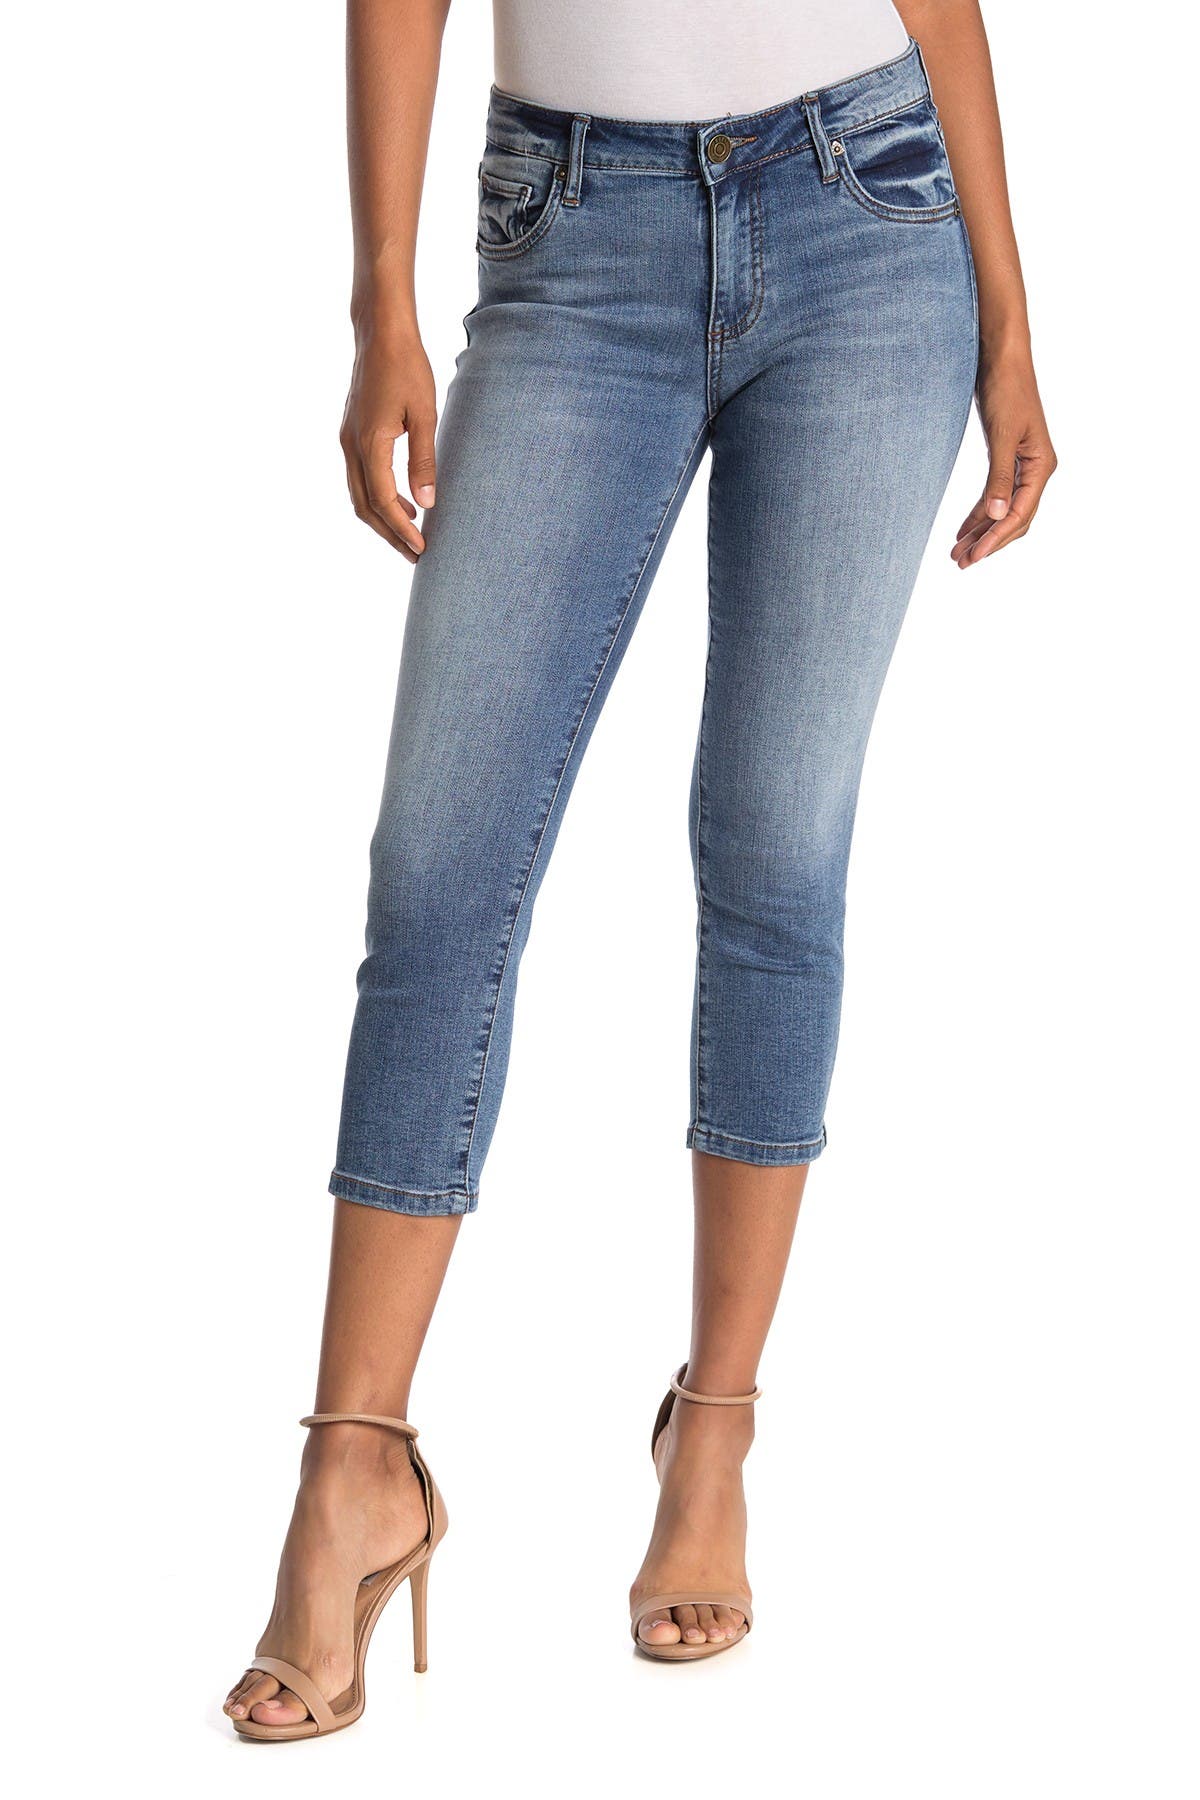 kut from the kloth cropped jeans